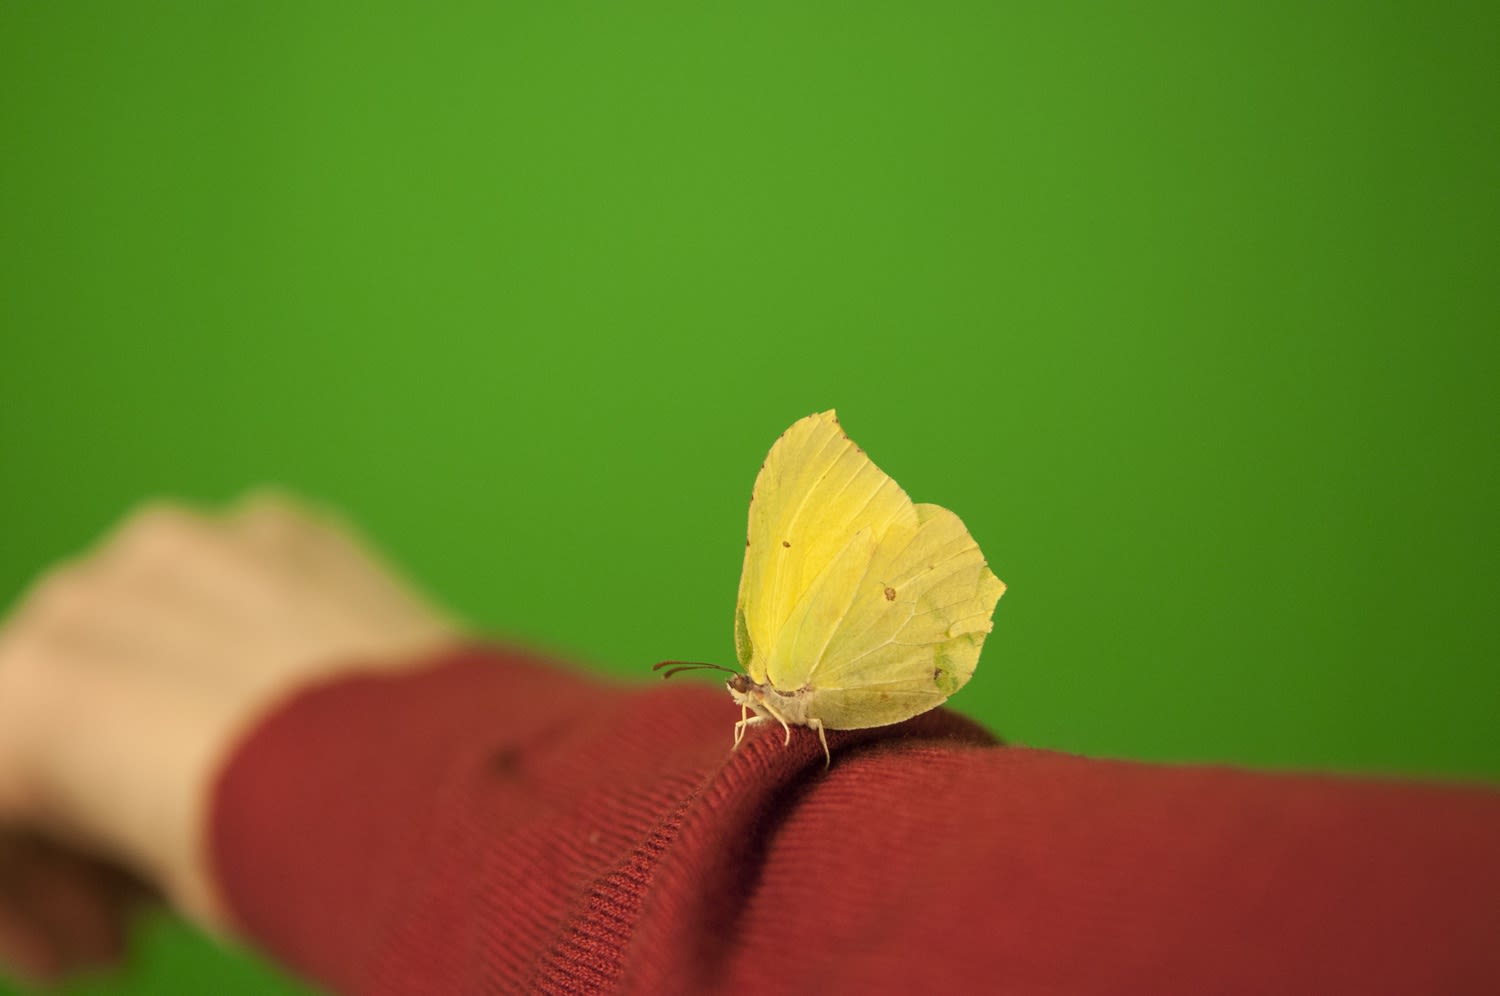 Image of yellow butterfly on red sleeve against green background.